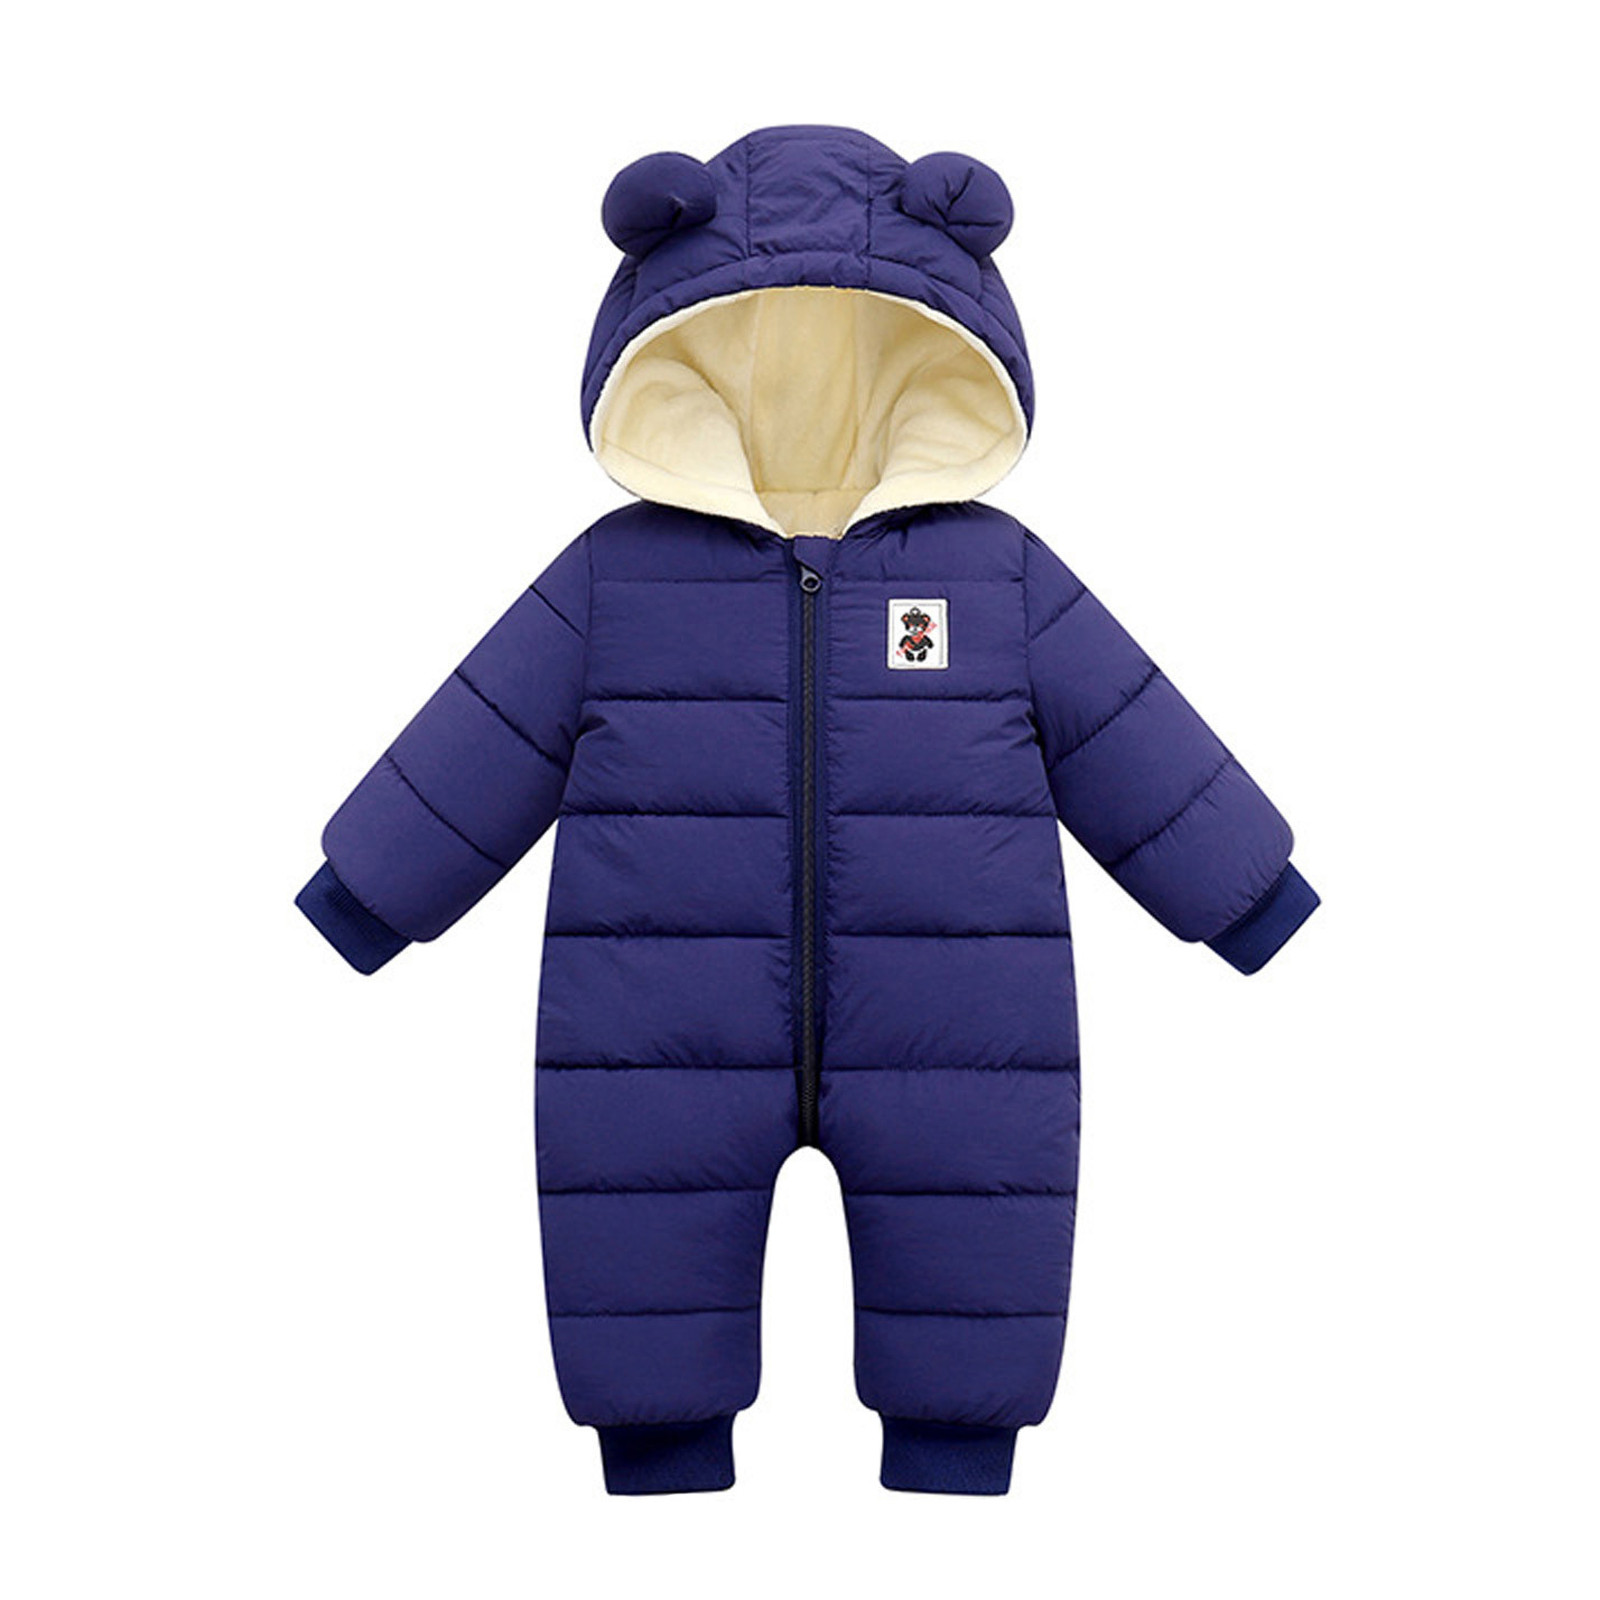 Newborn Infant Jumpsuit Romper Clothes Baby Hooded Thick Snowsuit Boys Girls Romper Baby Winter warm Coat Outwear Jacket